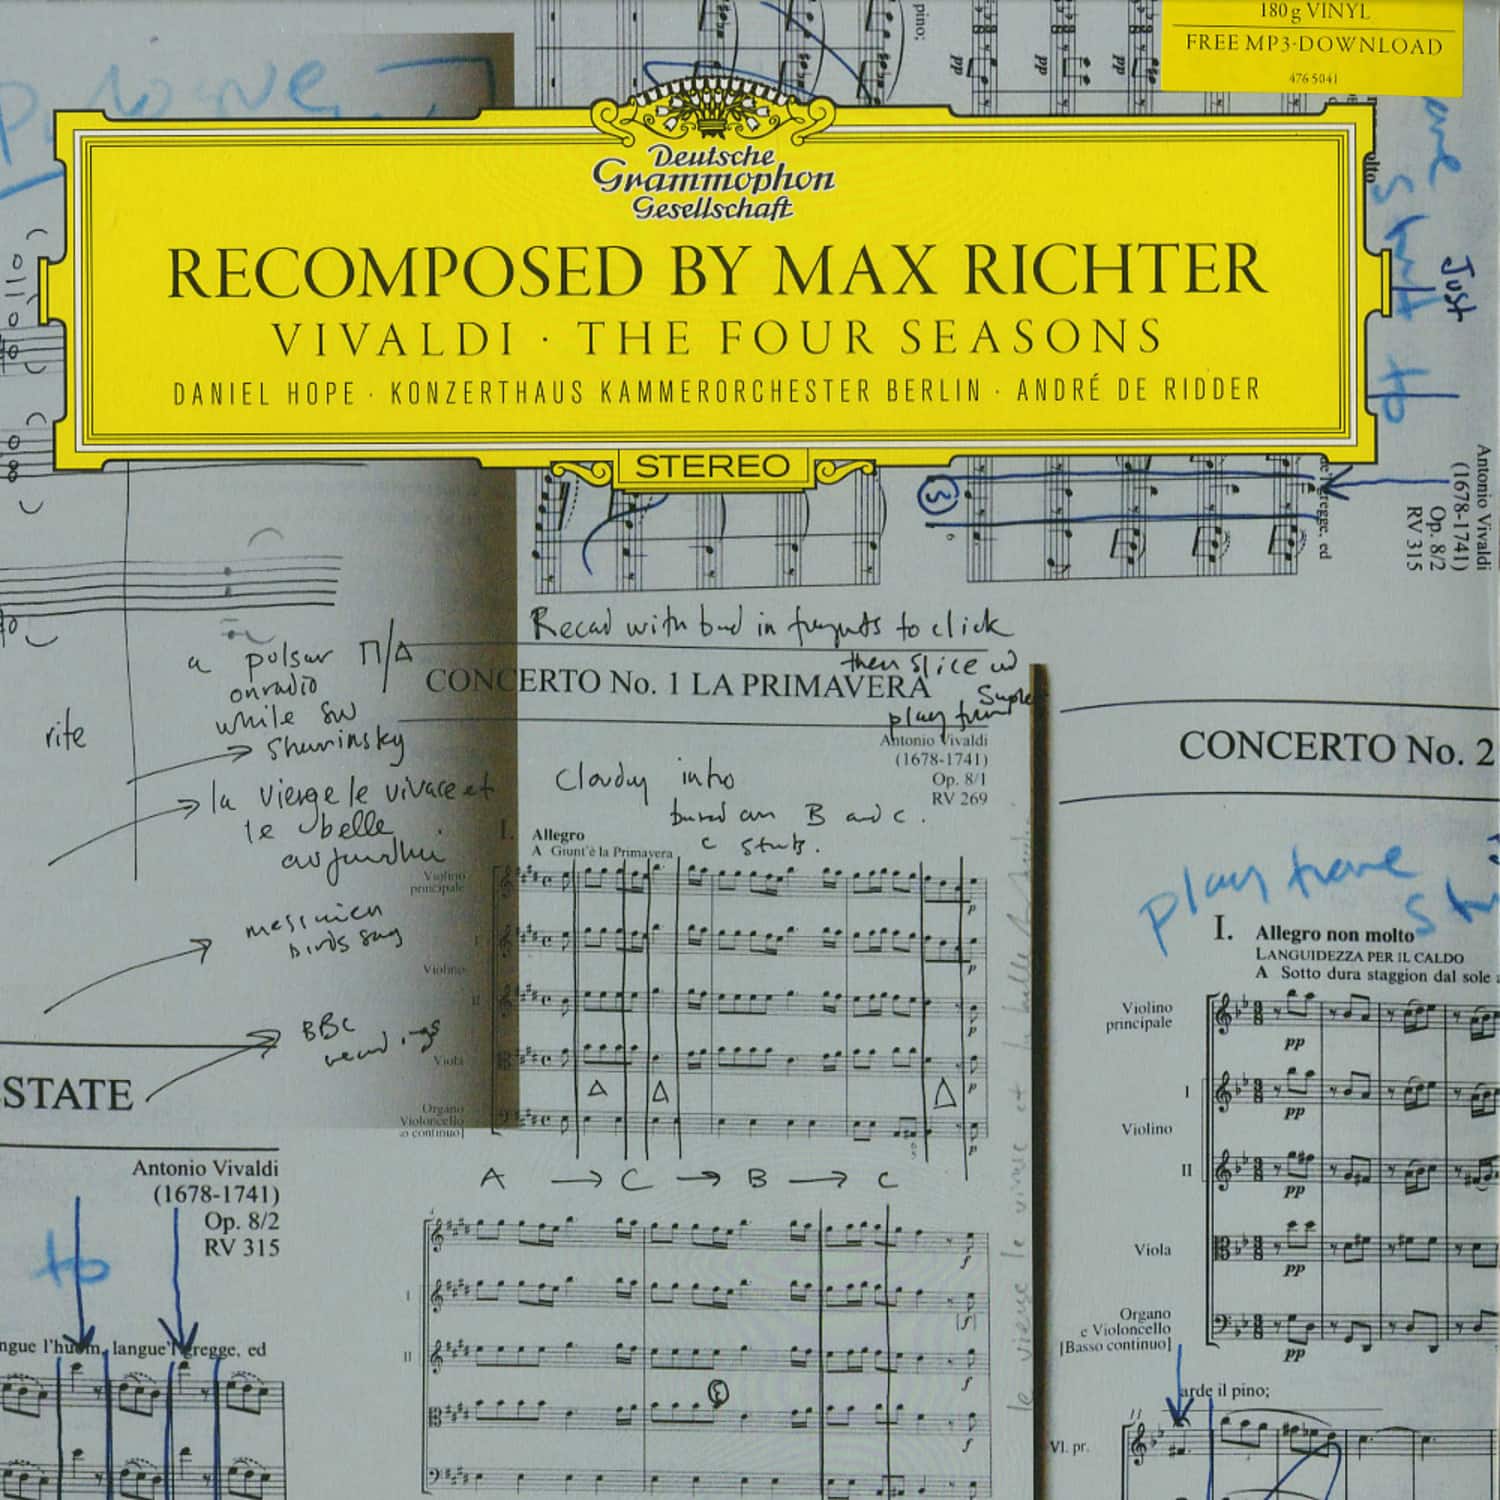 Vivaldi - RECOMPOSED BY MAX RICHTER - FOUR SEASONS 